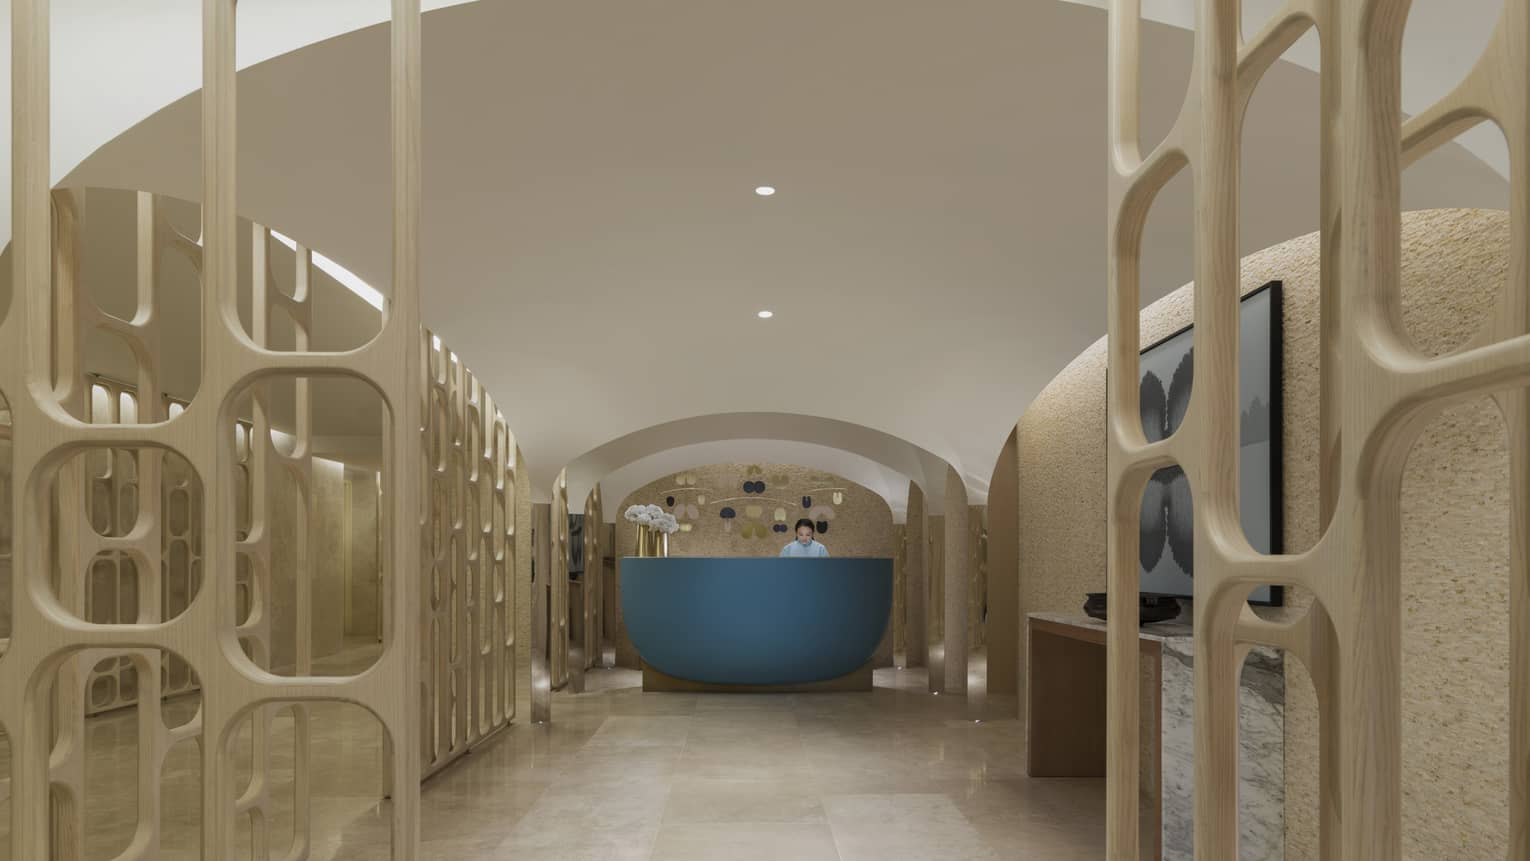 The spa entrance is marked by a blue desk sits on a marble floor